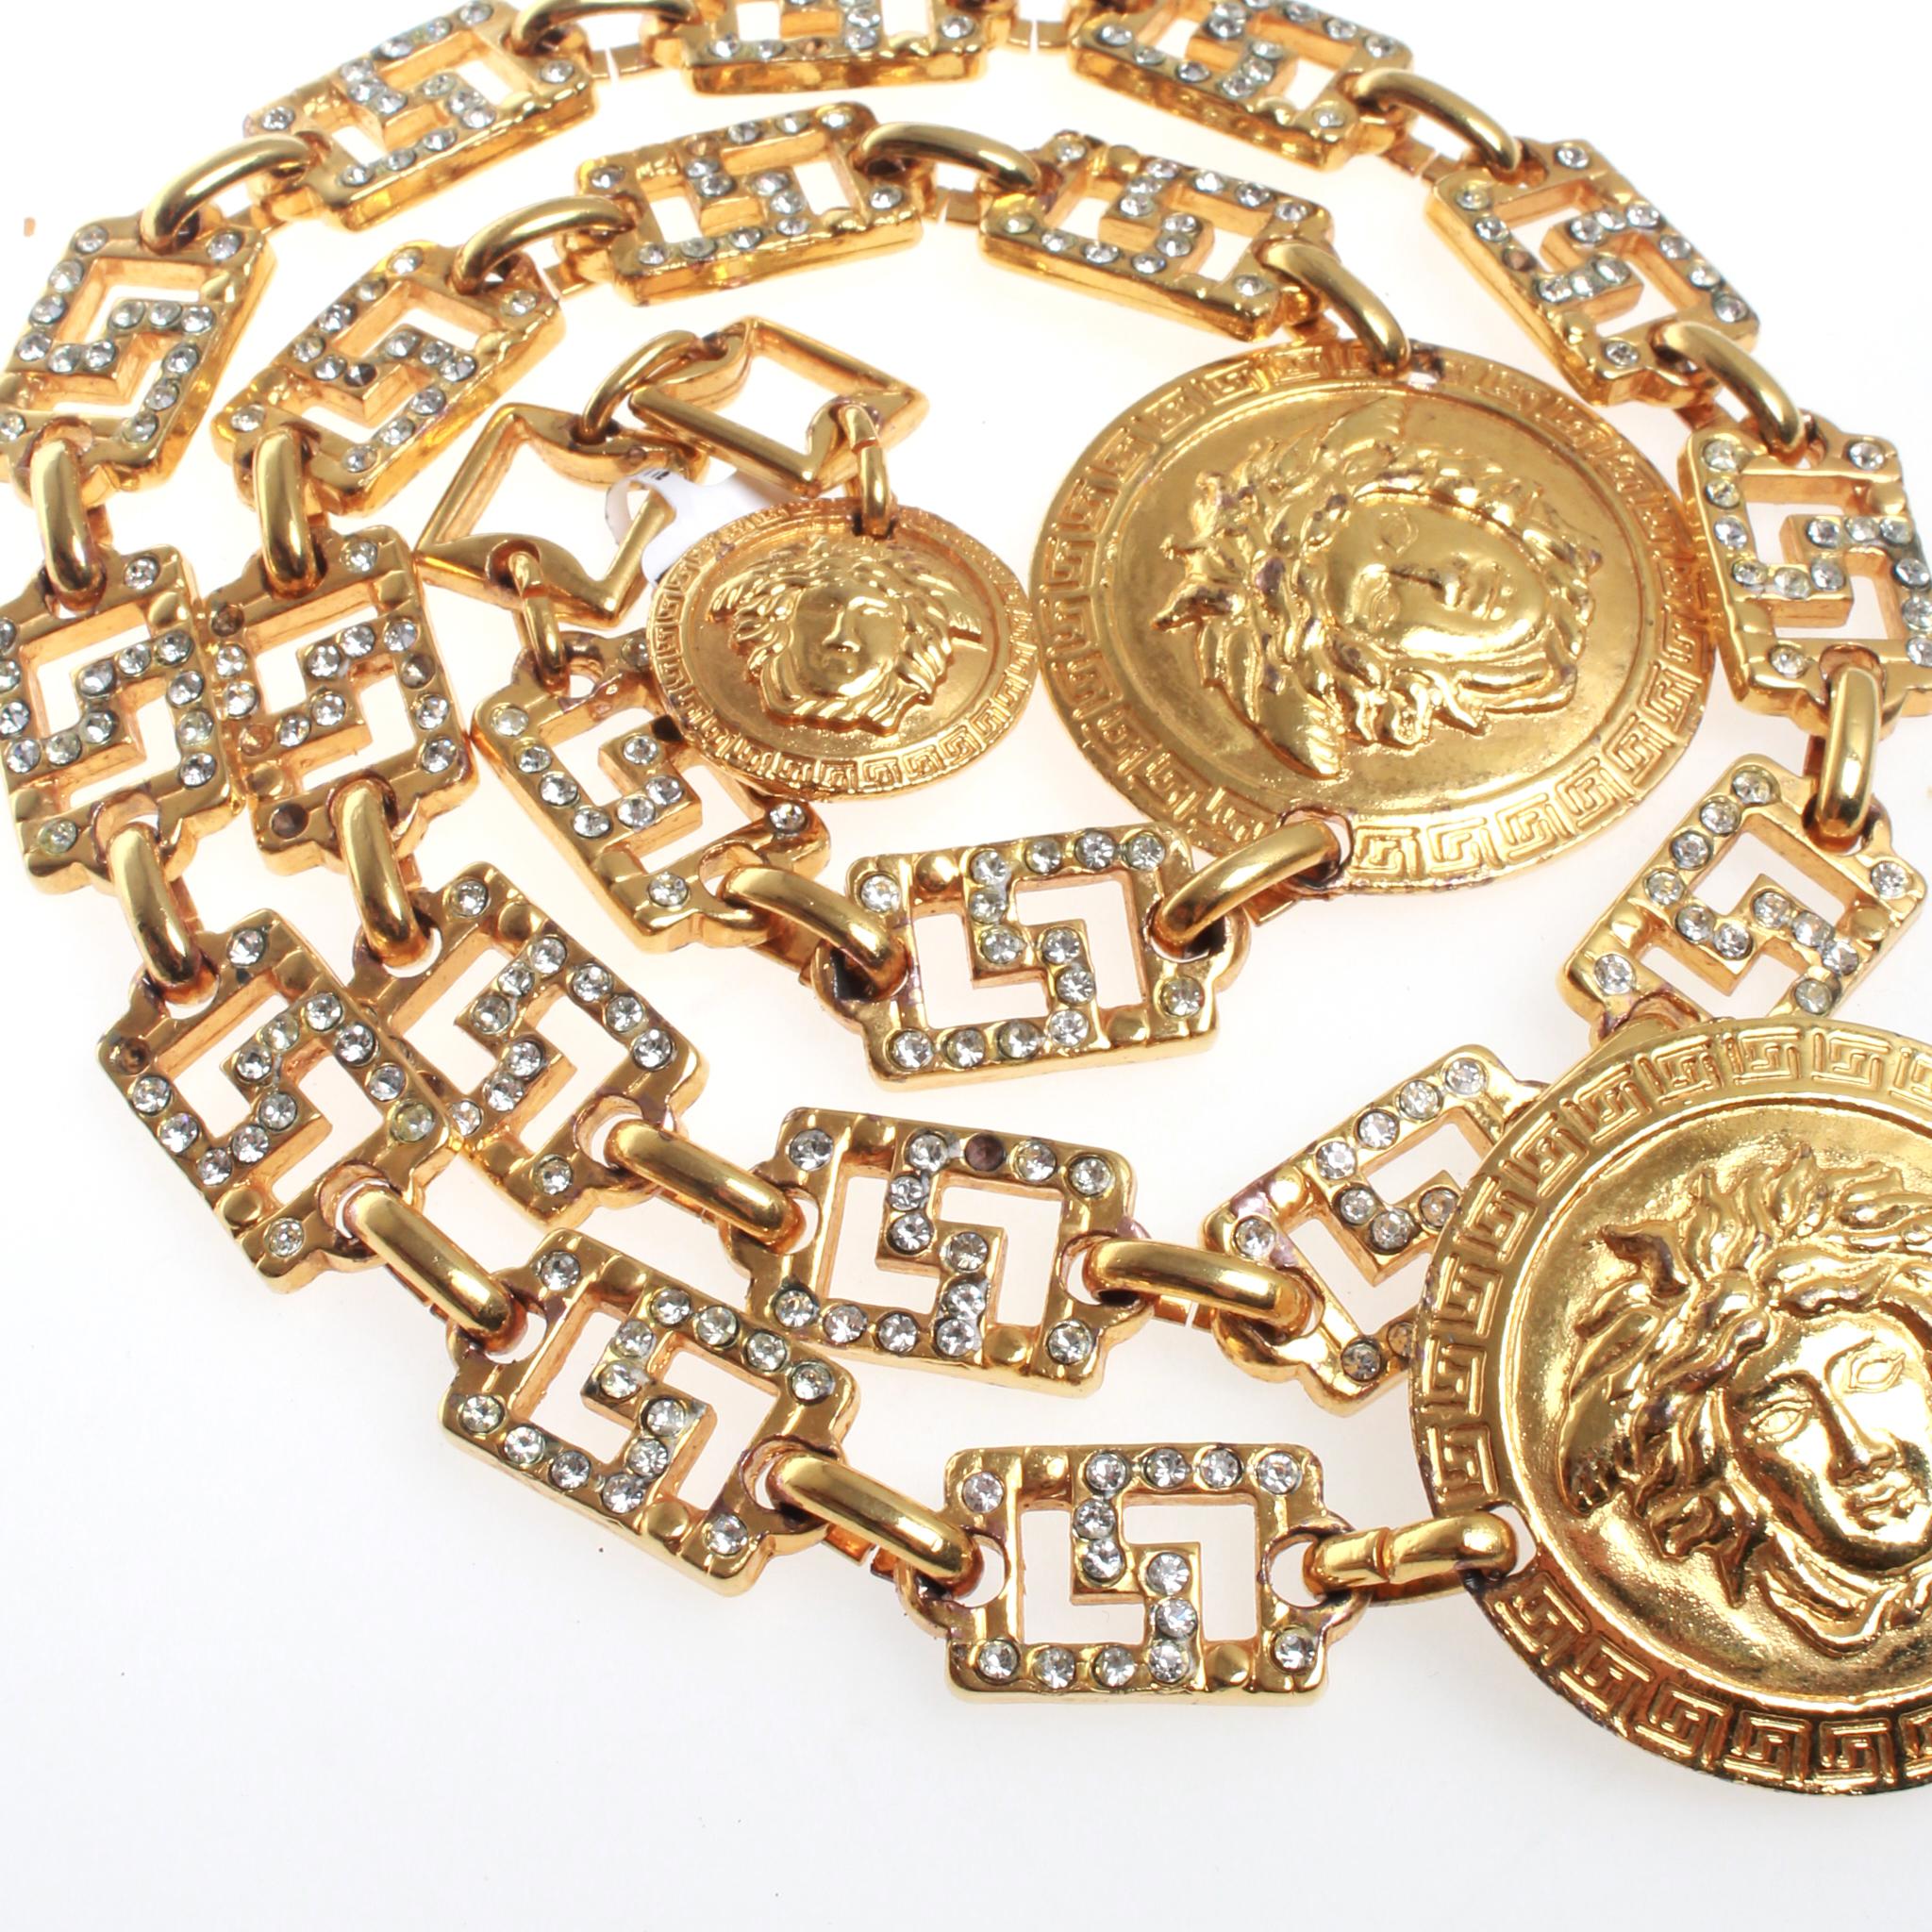 Iconic gold toned Versace medusa head medallion chain belt with diamante detailing. Adjustable sizing with hook fastener. Circa early 1990's. Made in Italy.

